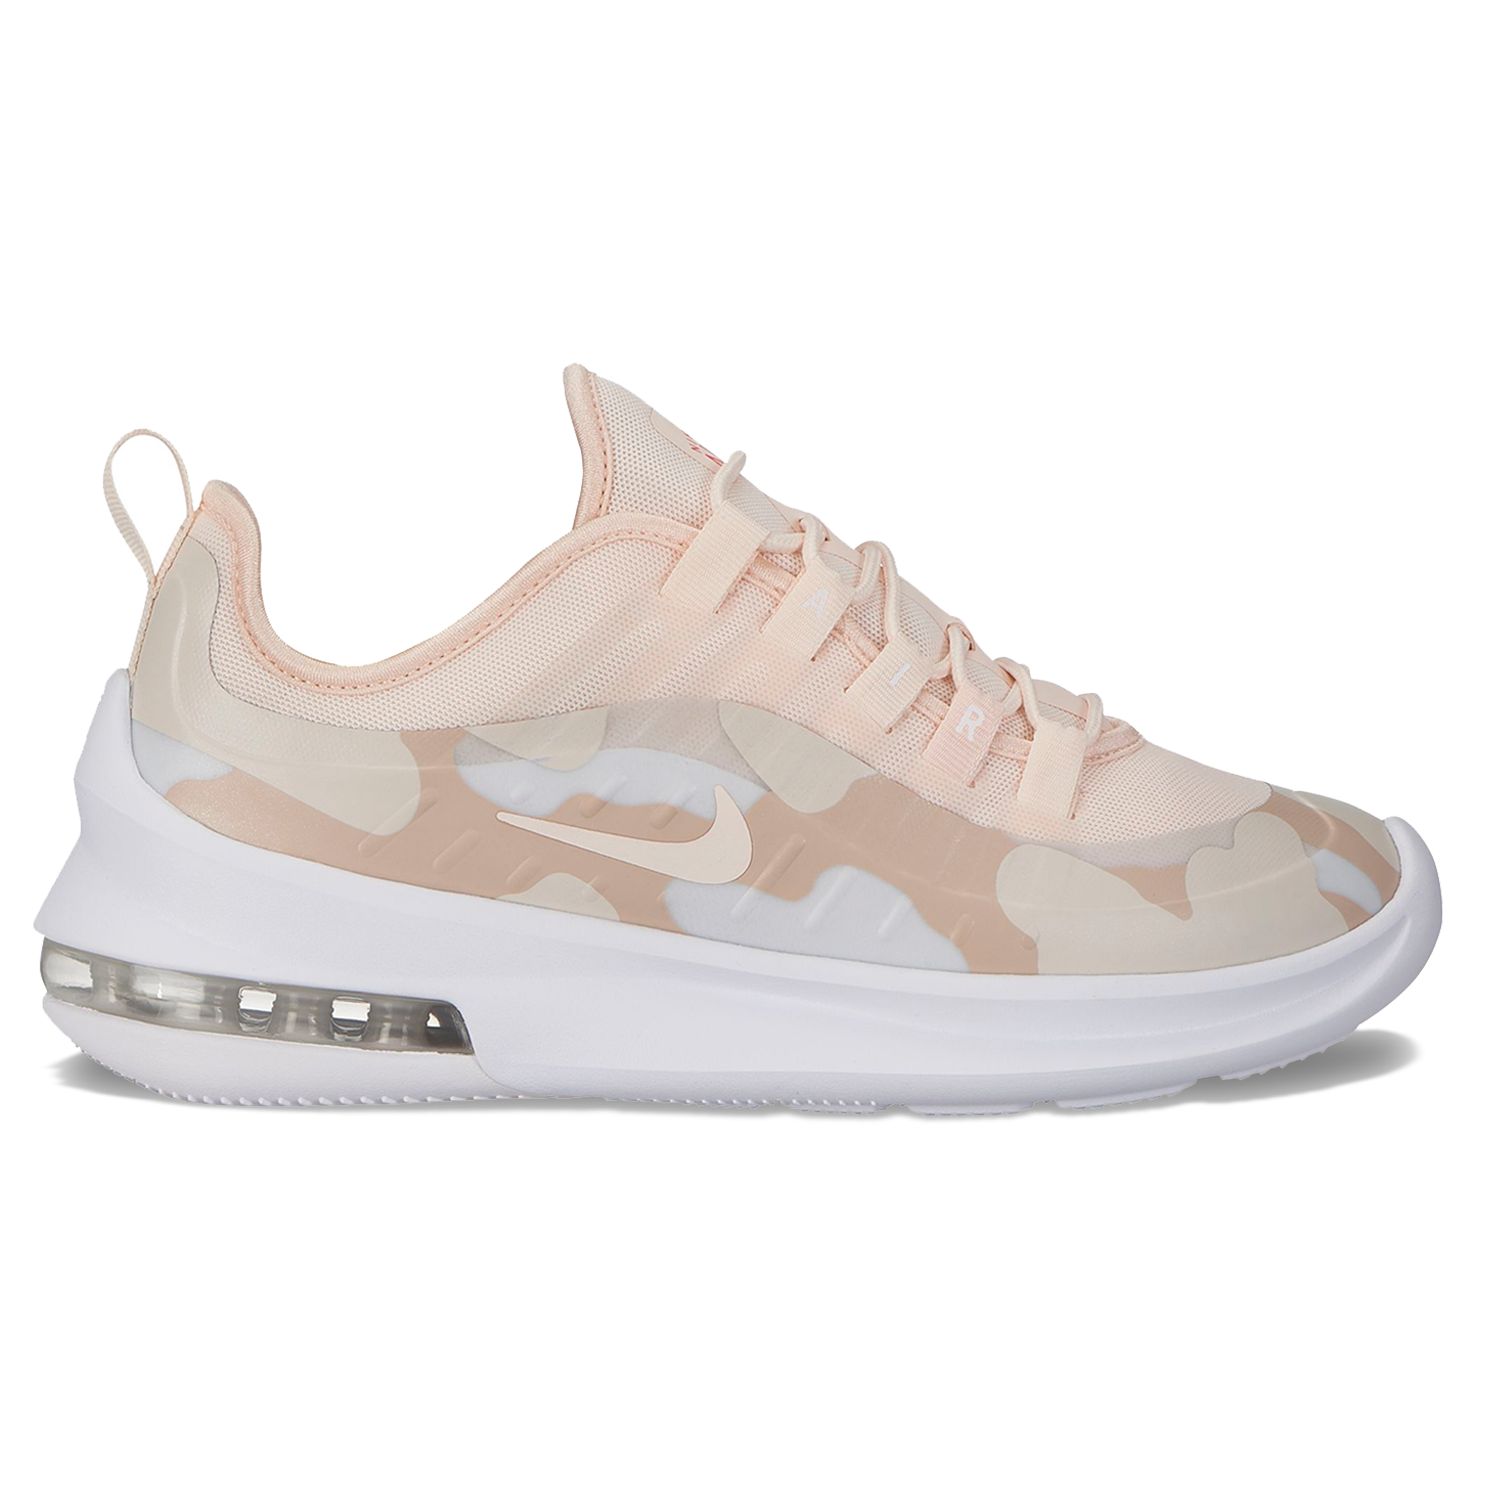 nike air max axis women's sneakers pink